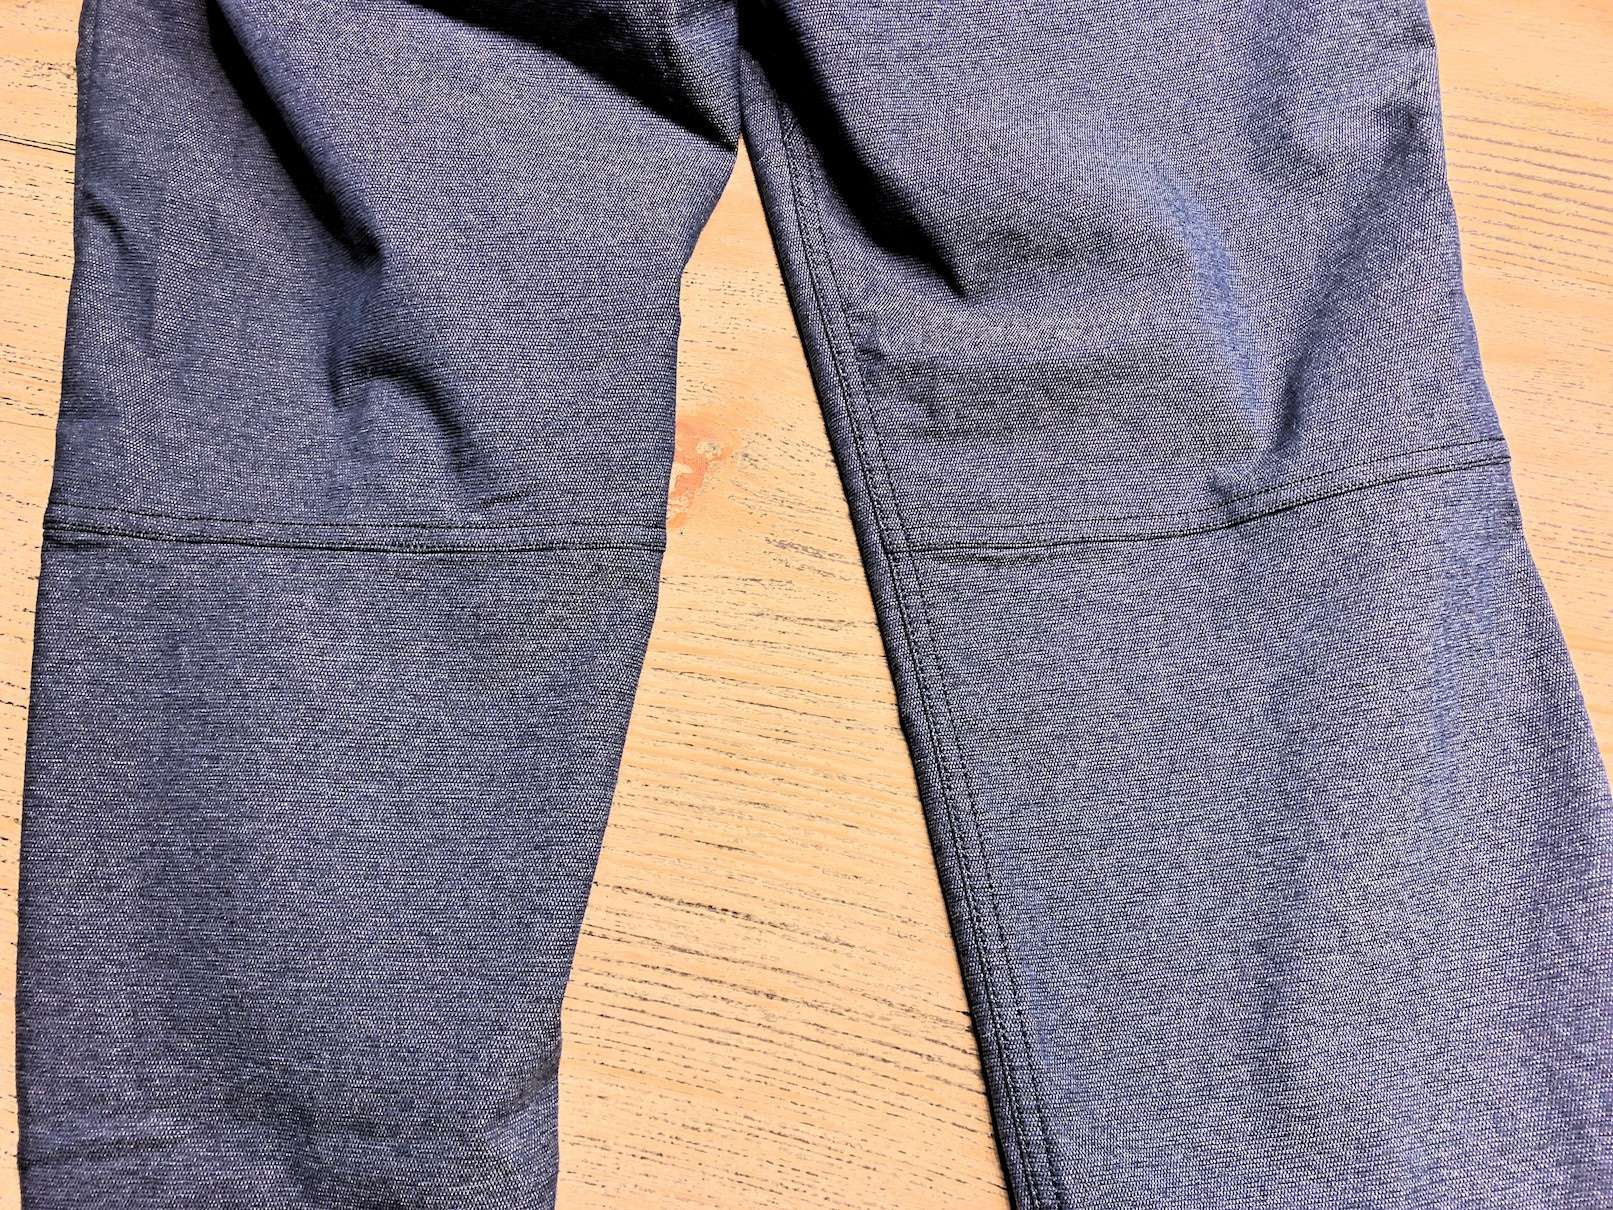 Lululemon "Jeans" are Here: Lululemon Tech Canvas Review 6